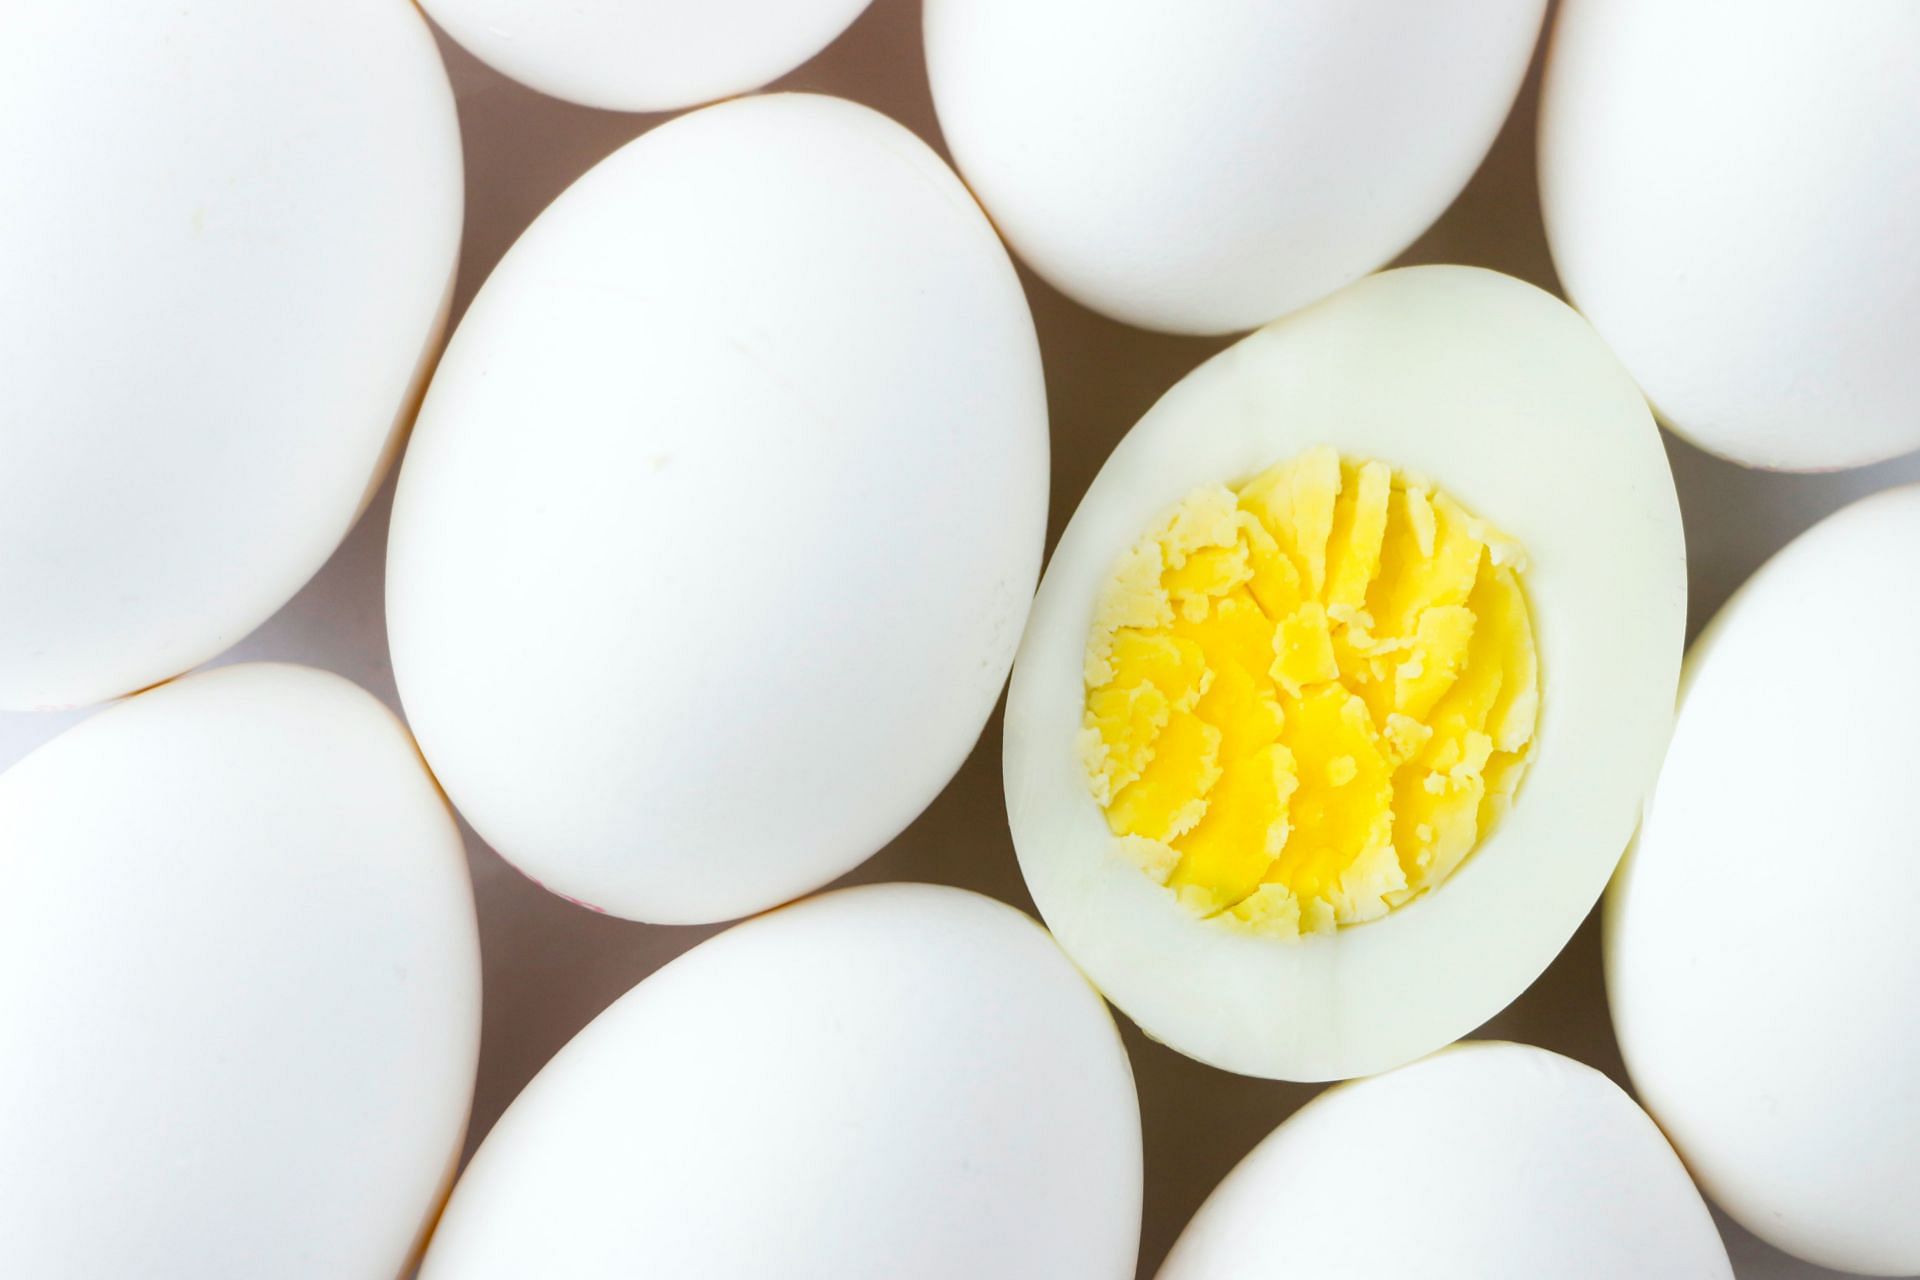 There are a lot of calories in an egg. (Image via Unsplash / Mustafa Bashari)